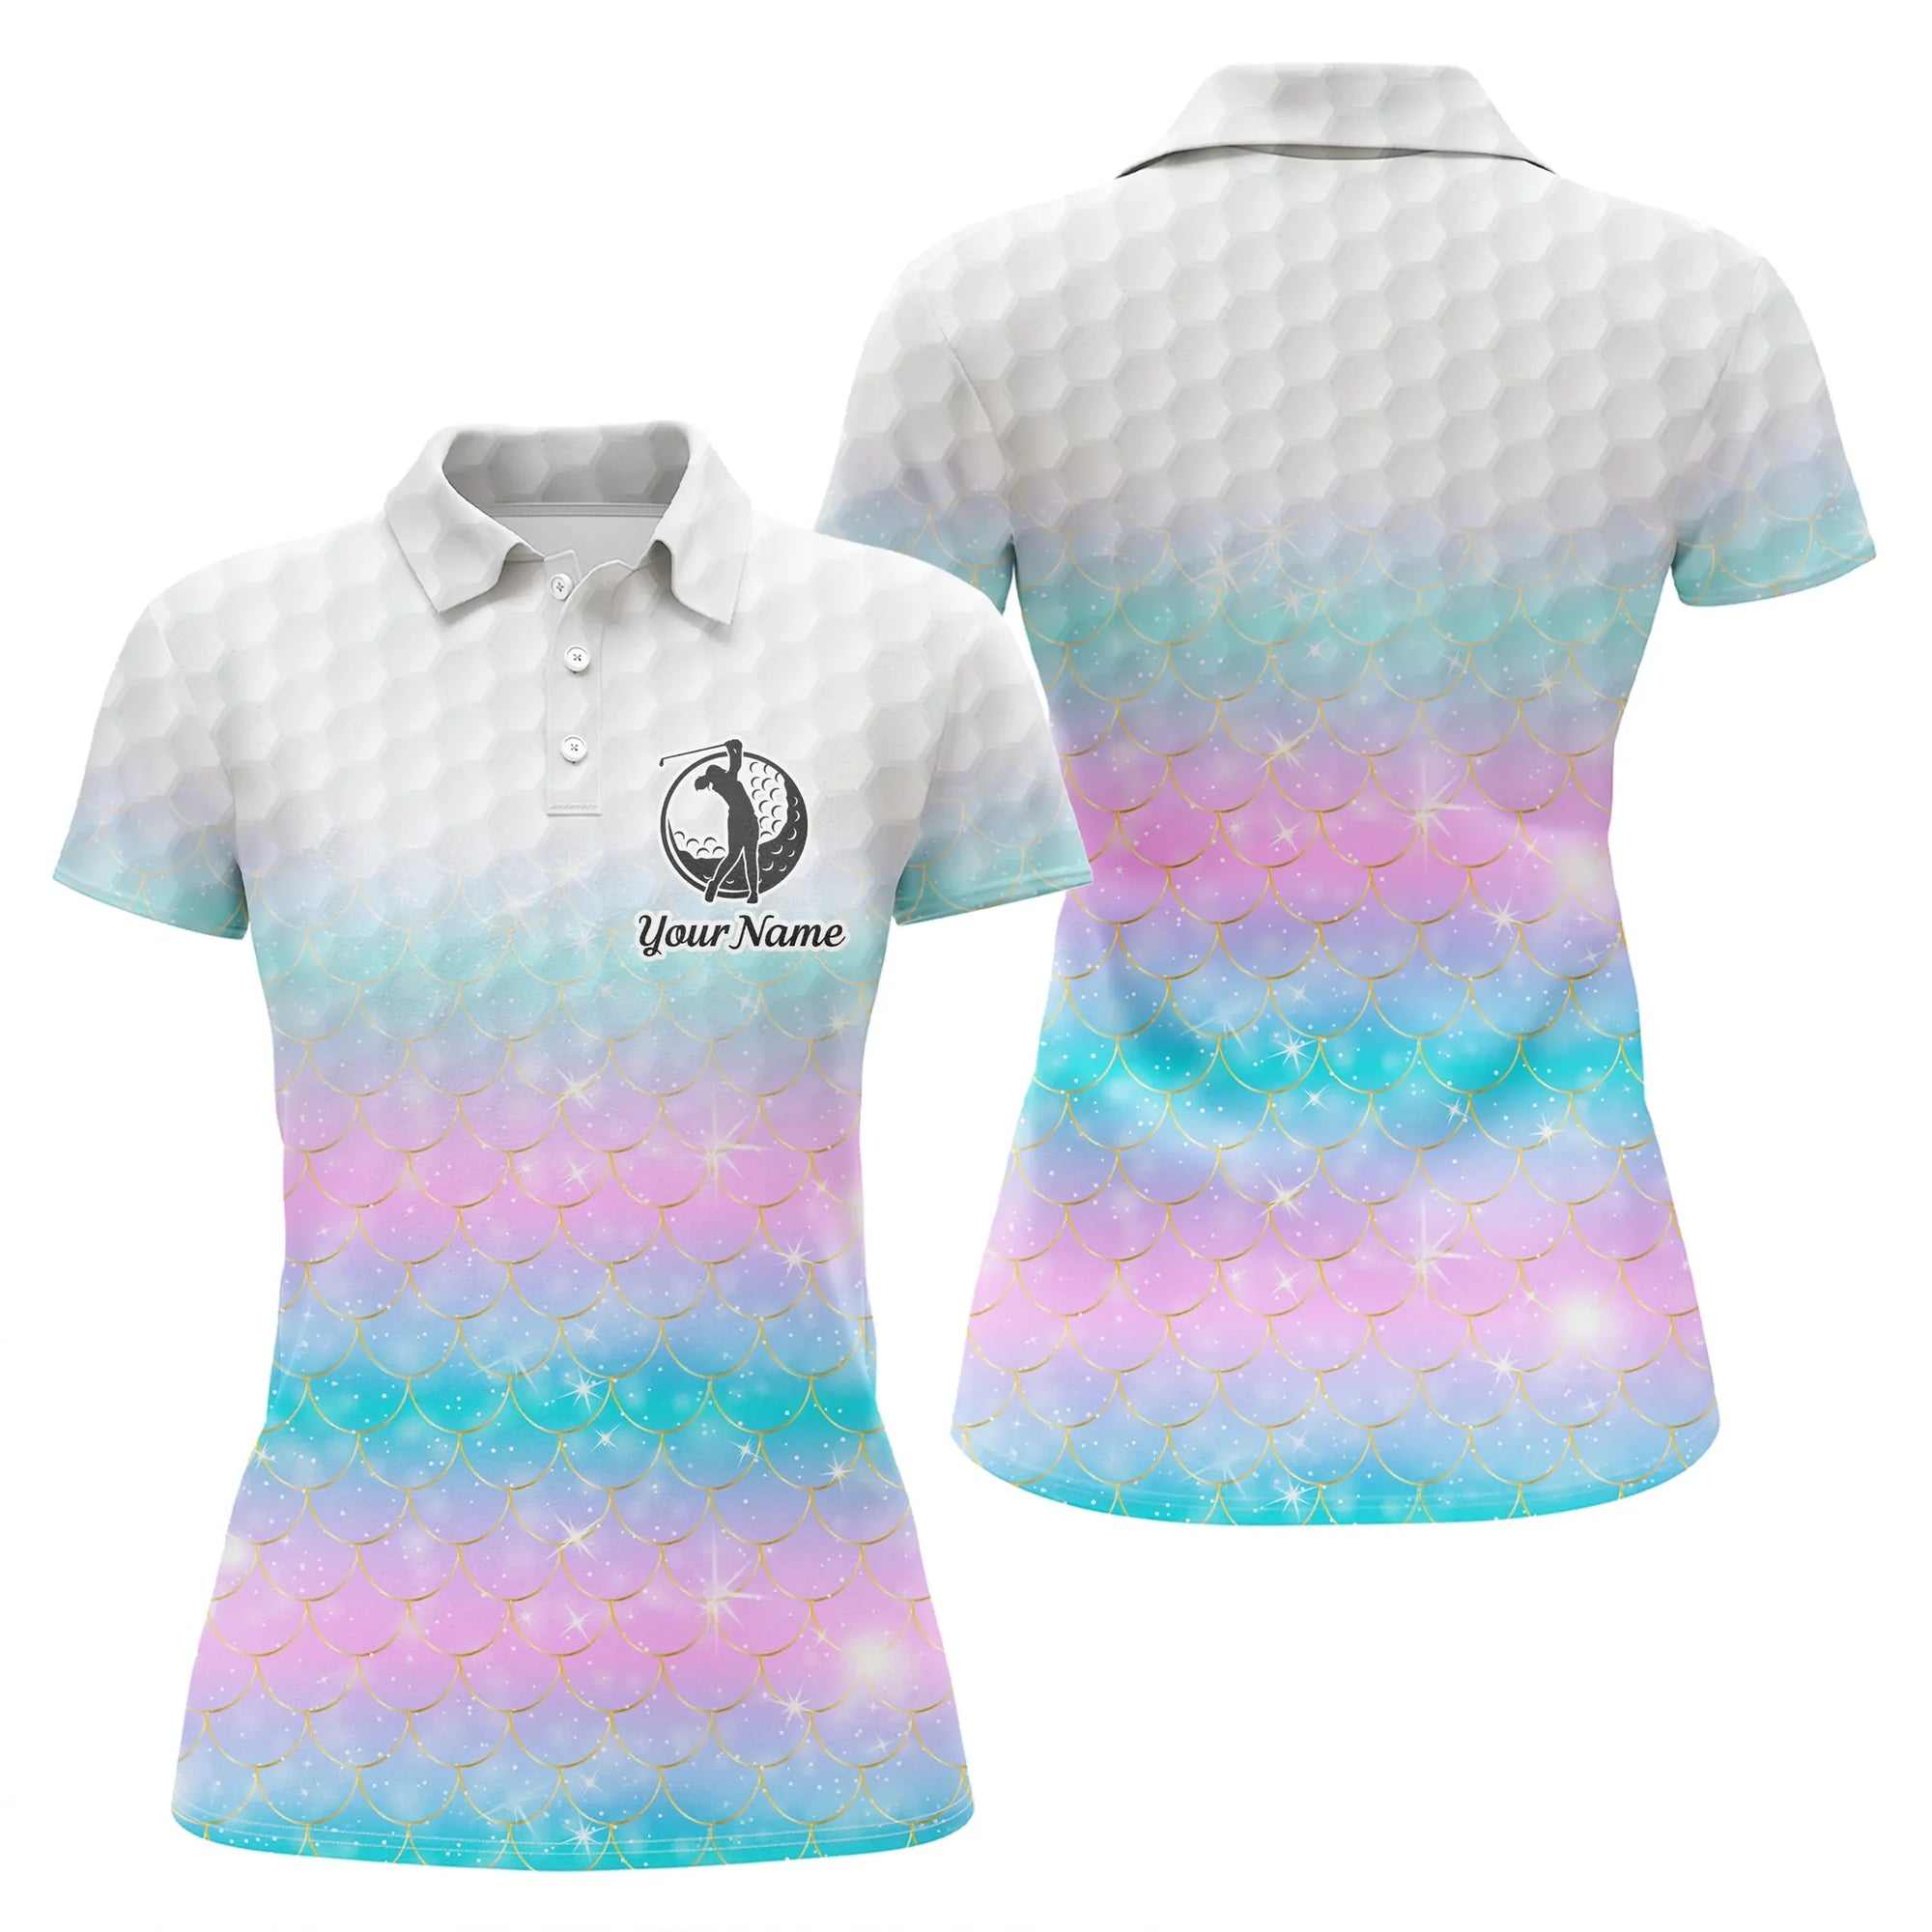 Customized Name Golf Women Polo Shirt, Personalized Rainbow Mermaid Scales Pattern Golf Shirts - Perfect Gift For Ladies, Golf Lovers, Golfers